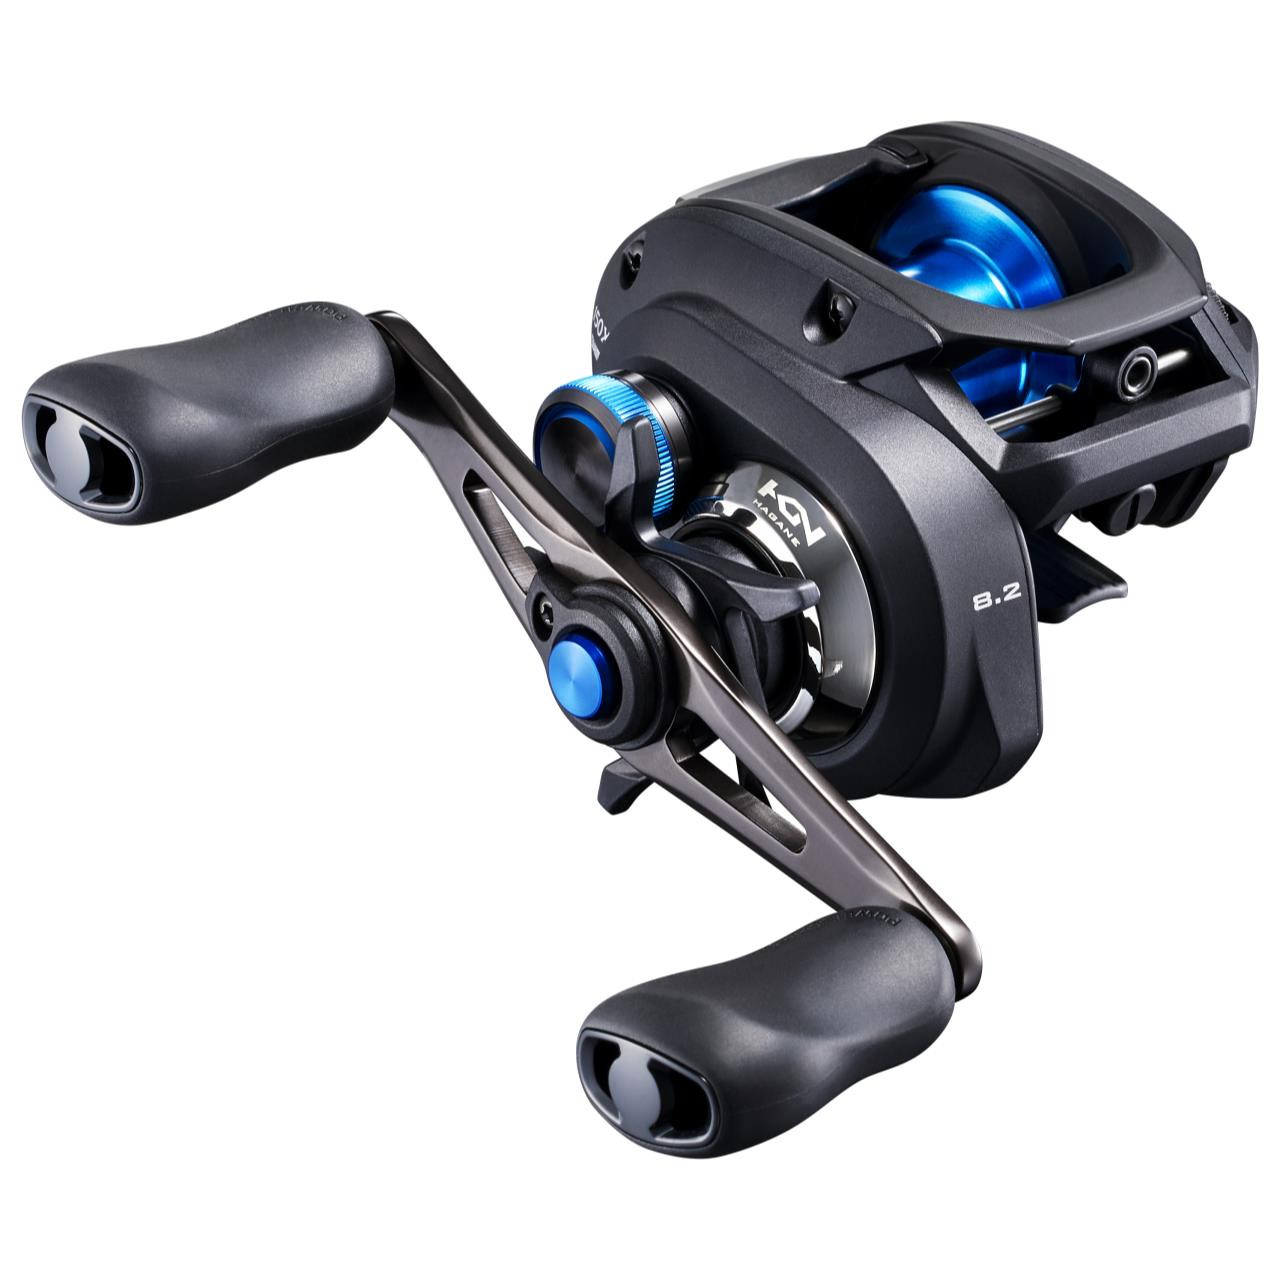 https://cdn11.bigcommerce.com/s-70mih4s/images/stencil/1280x1280/products/19387/50682/Shimano-SLX-DC-150-Baitcaster-Reels-022255225748_image1__55115.1614794569.jpg?c=2